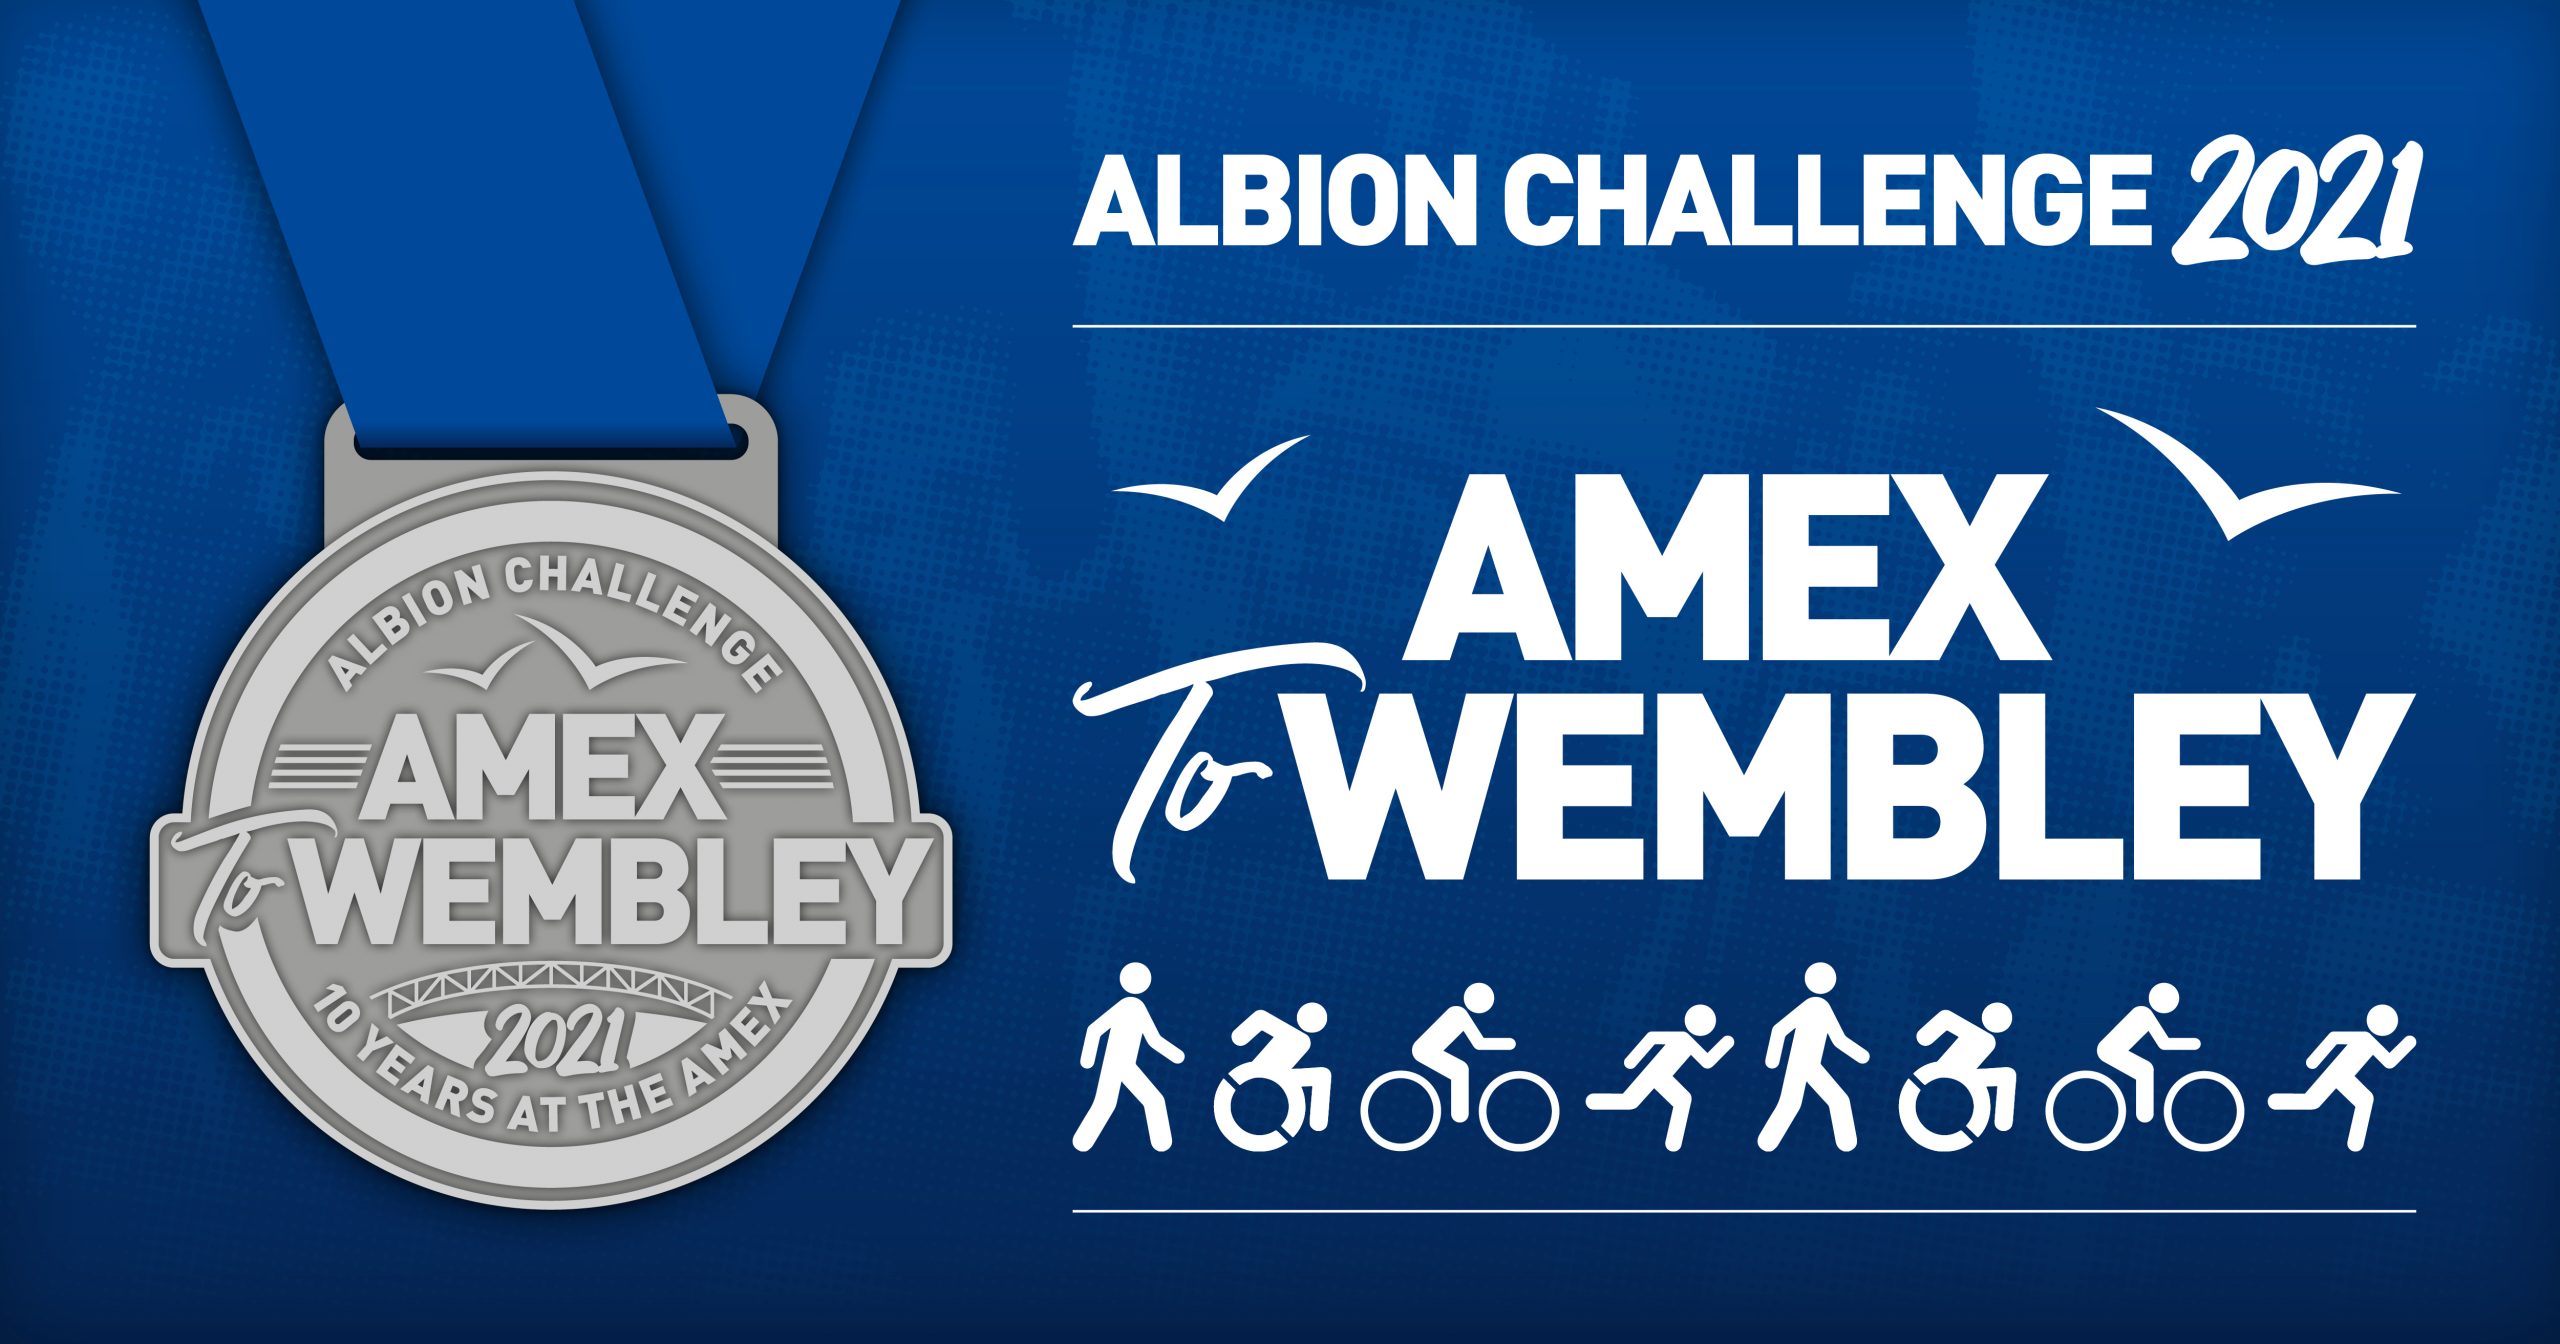 Albion Challenge: Amex to Wembley